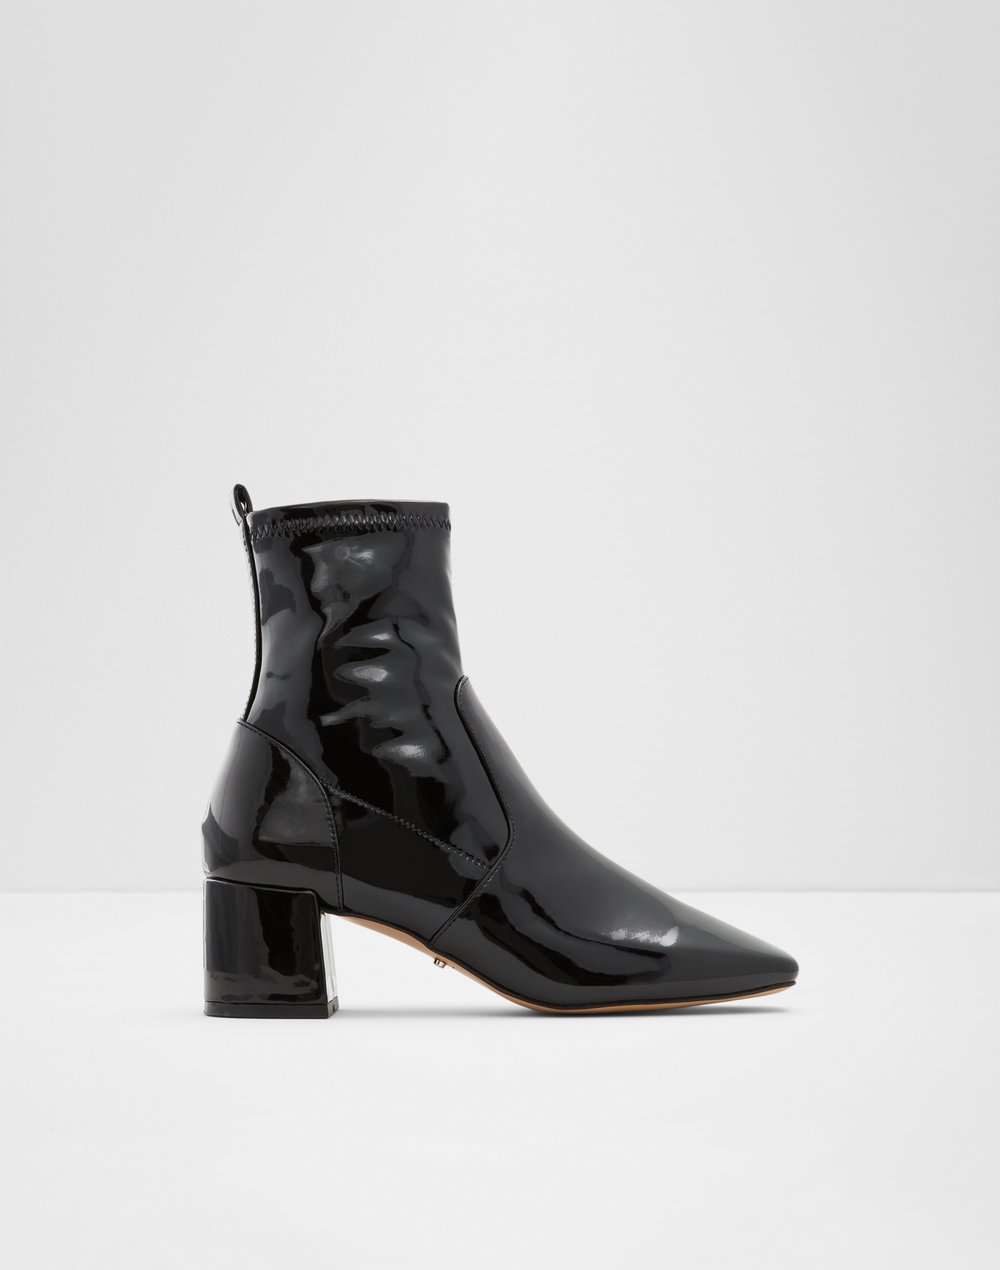 Women's Boots: Ankle, Knee High & Winter Boots | ALDO Canada